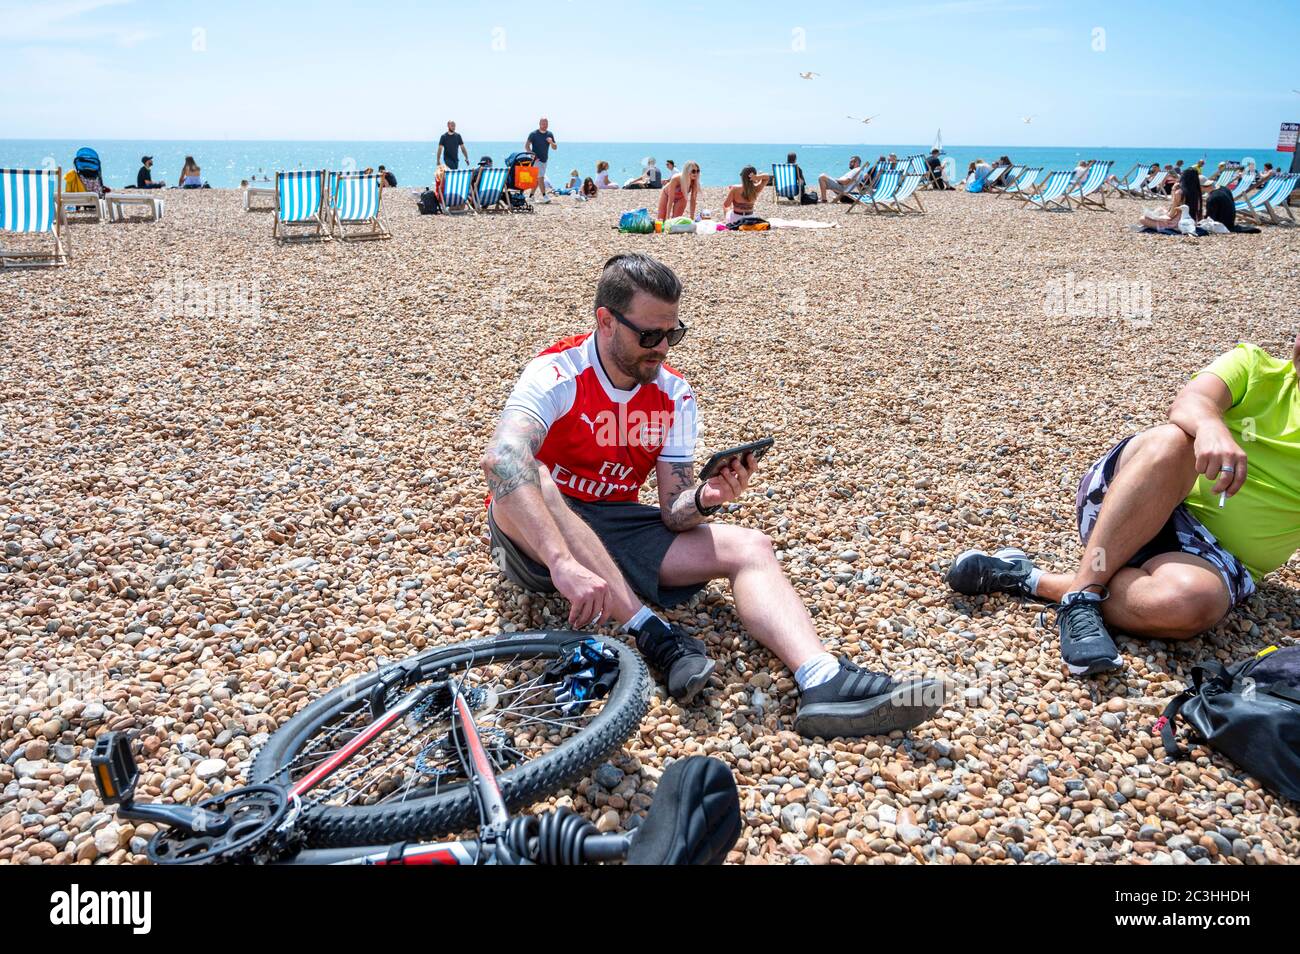 Brighton UK 20th June 2020 -   An Arsenal football fan tunes in his mobile phone on Brighton beach ready to watch the Premier League match against Brighton today during the coronavirus COVID-19 pandemic crisis . All the matches are  being played behind closed doors because of the lockdown restrictions   : Credit Simon Dack / Alamy Live News Stock Photo